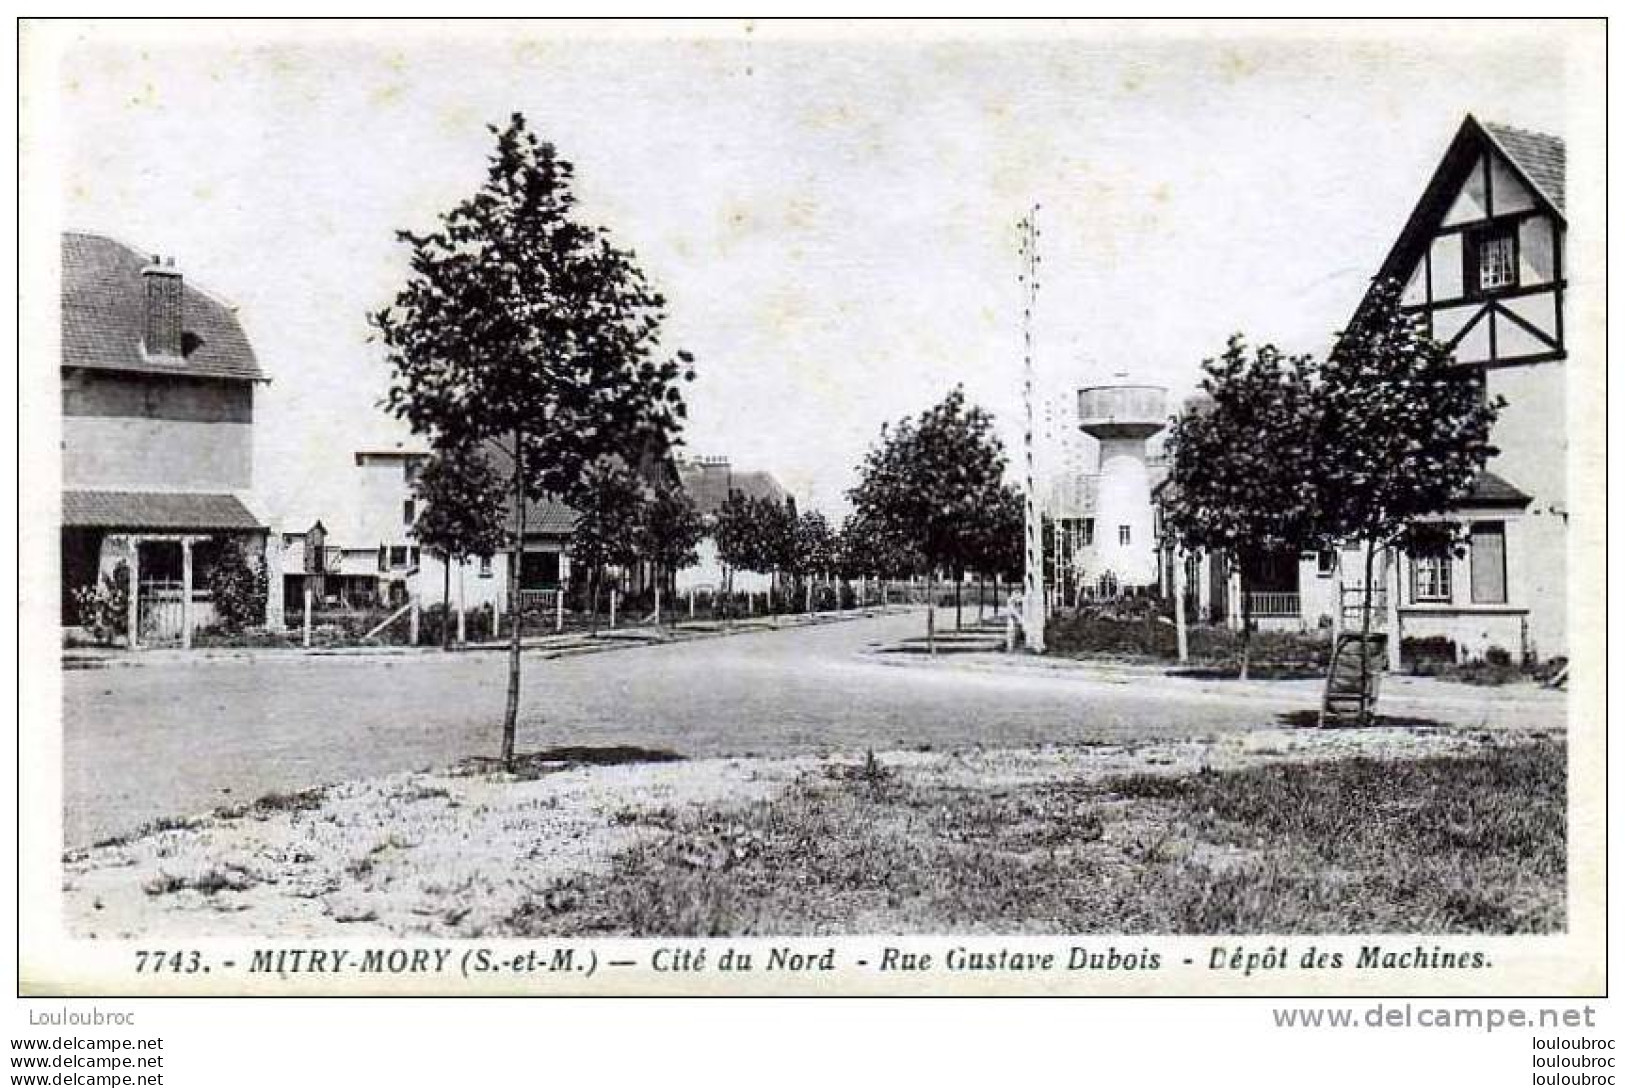 77 MITRY MORY CITE DU NORD RUE GUSTAVE DUBOIS DEPOT DES MACHINES - Mitry Mory